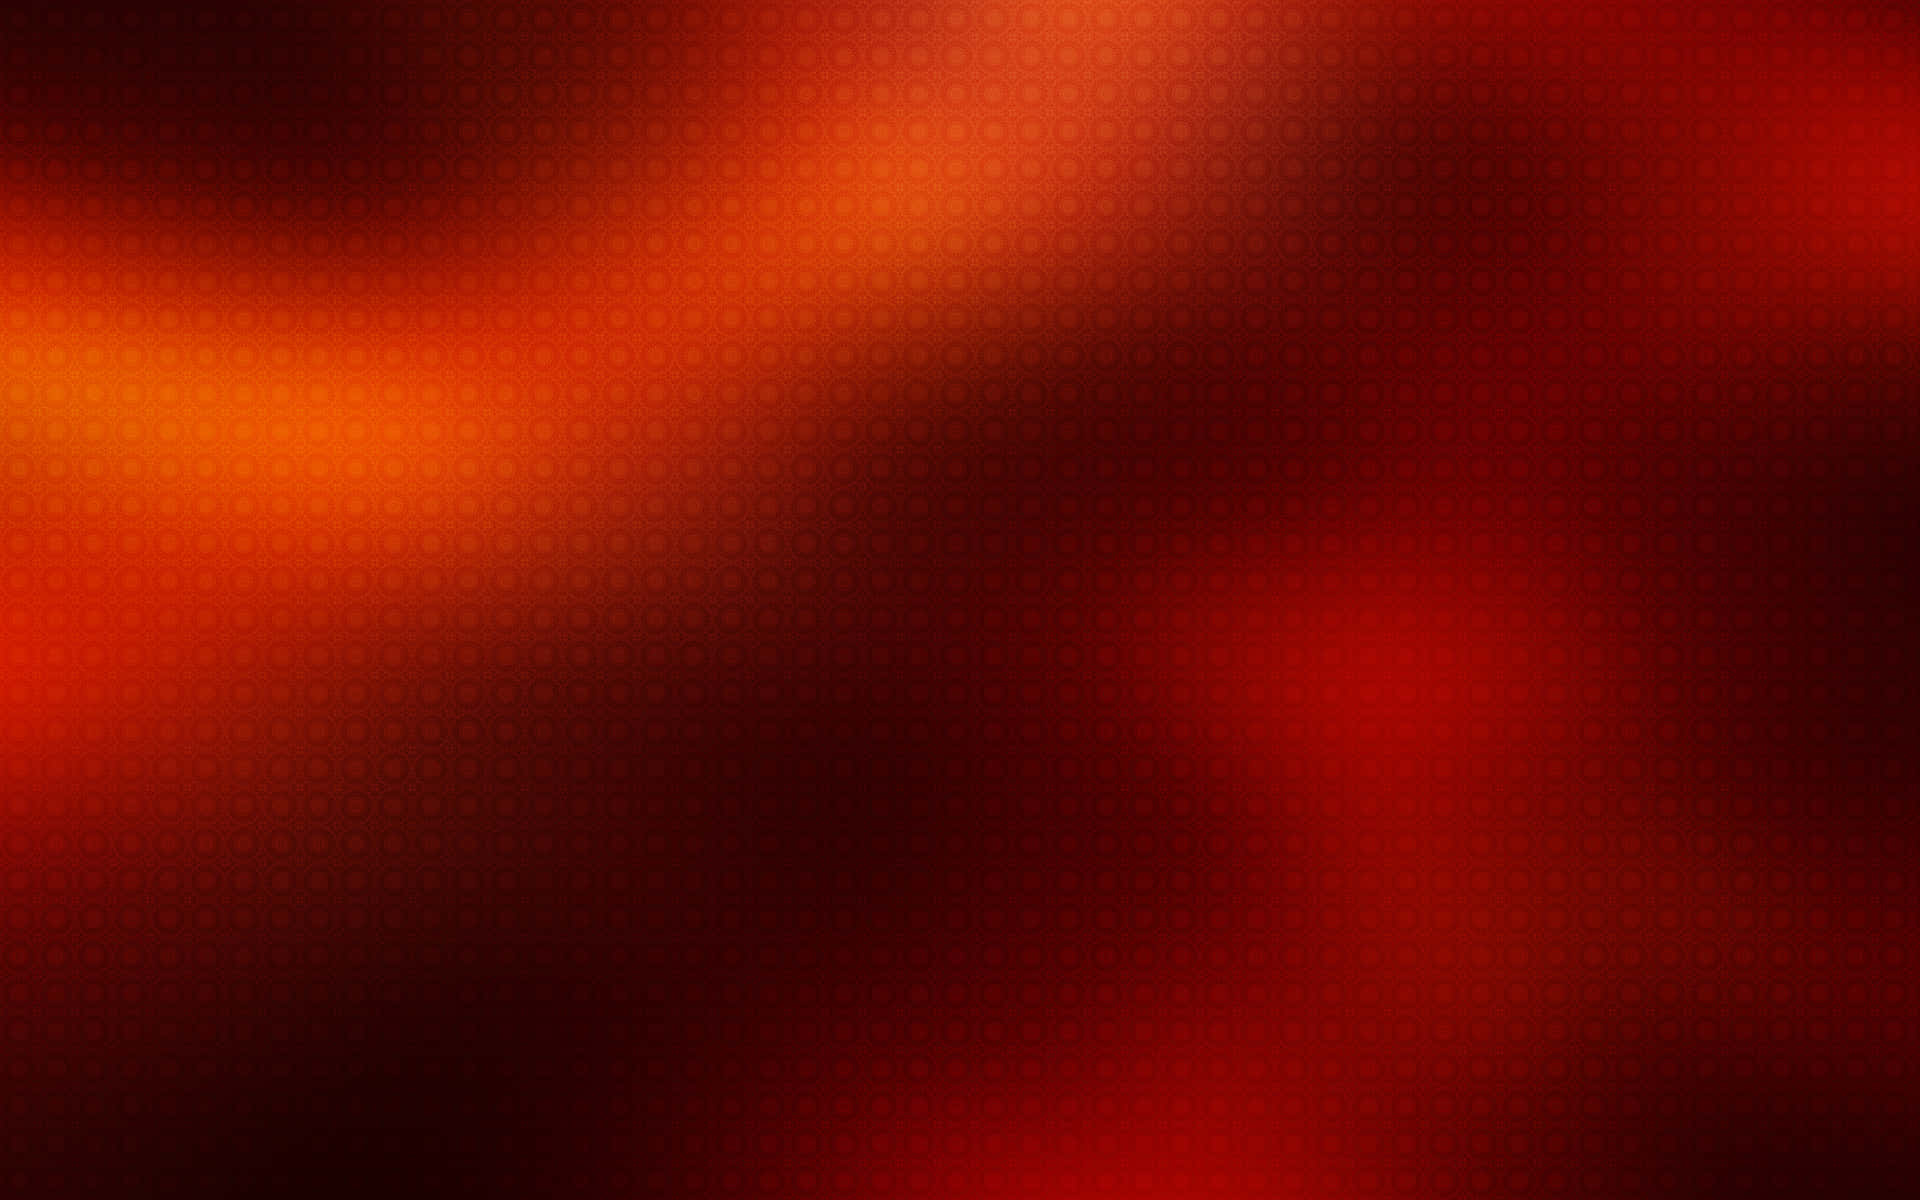 Be Bold with this High-Resolution Red Background